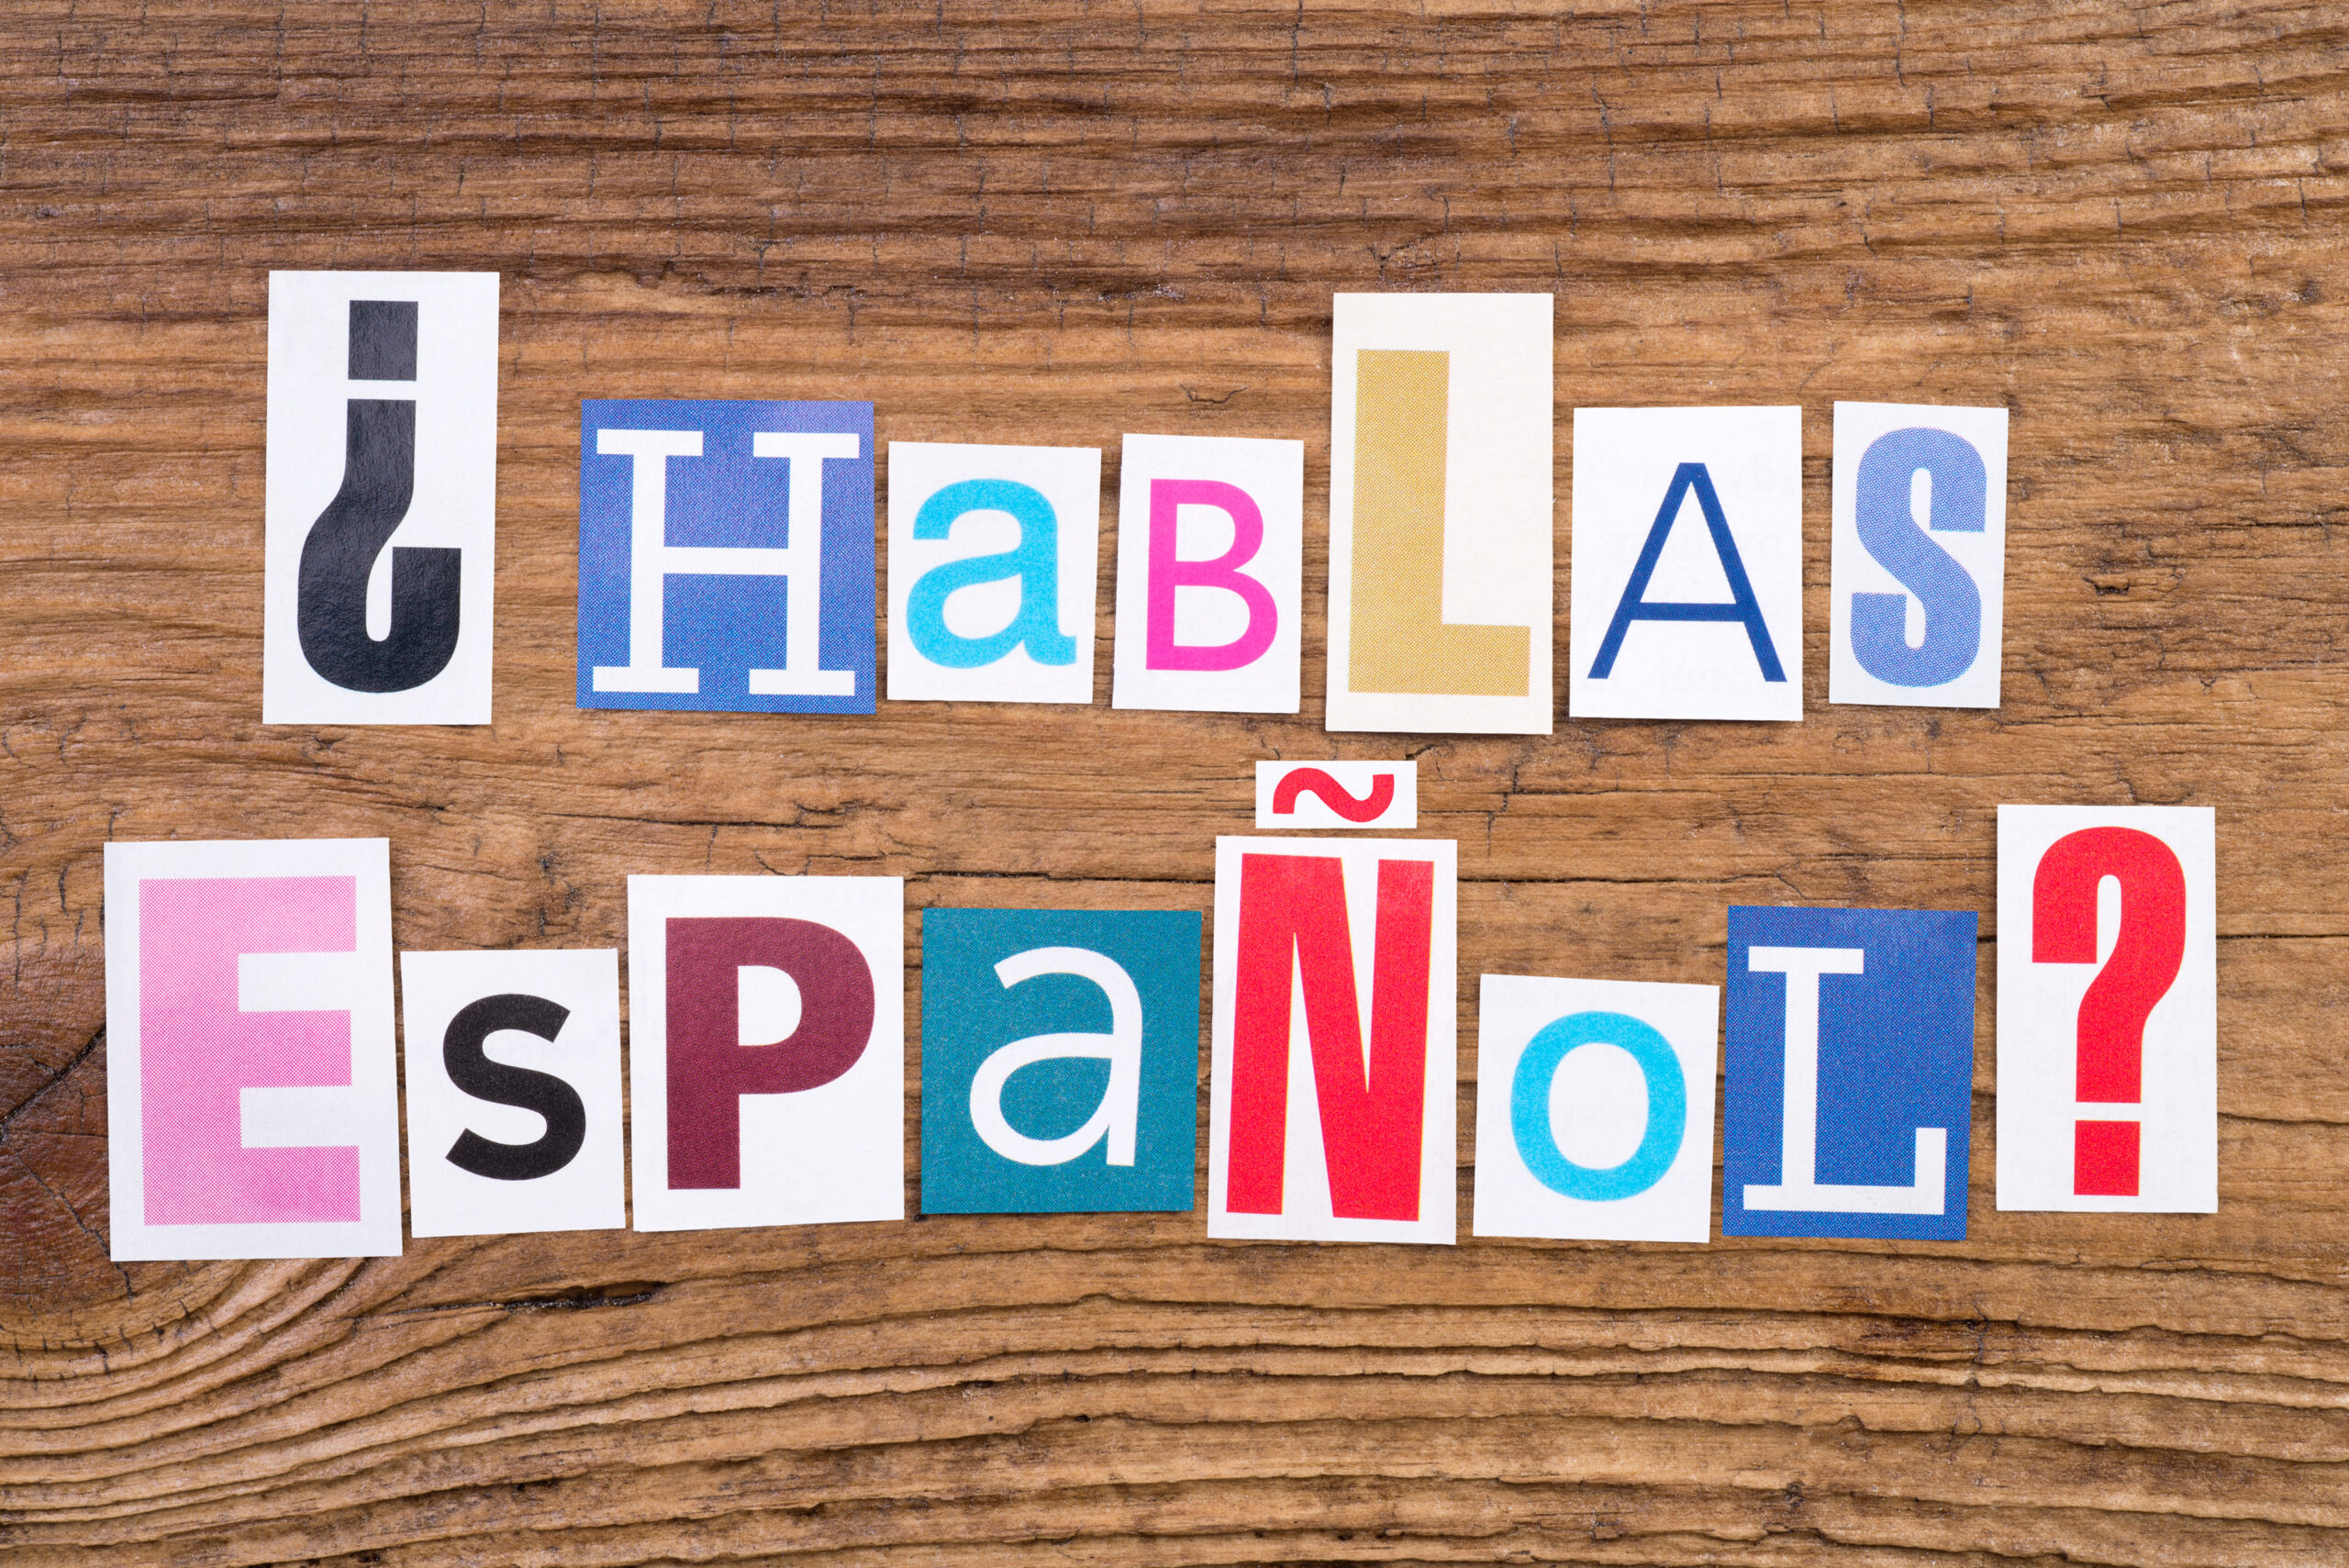 Question “Hablas Espanol?” in cut out magazine letters on wooden background